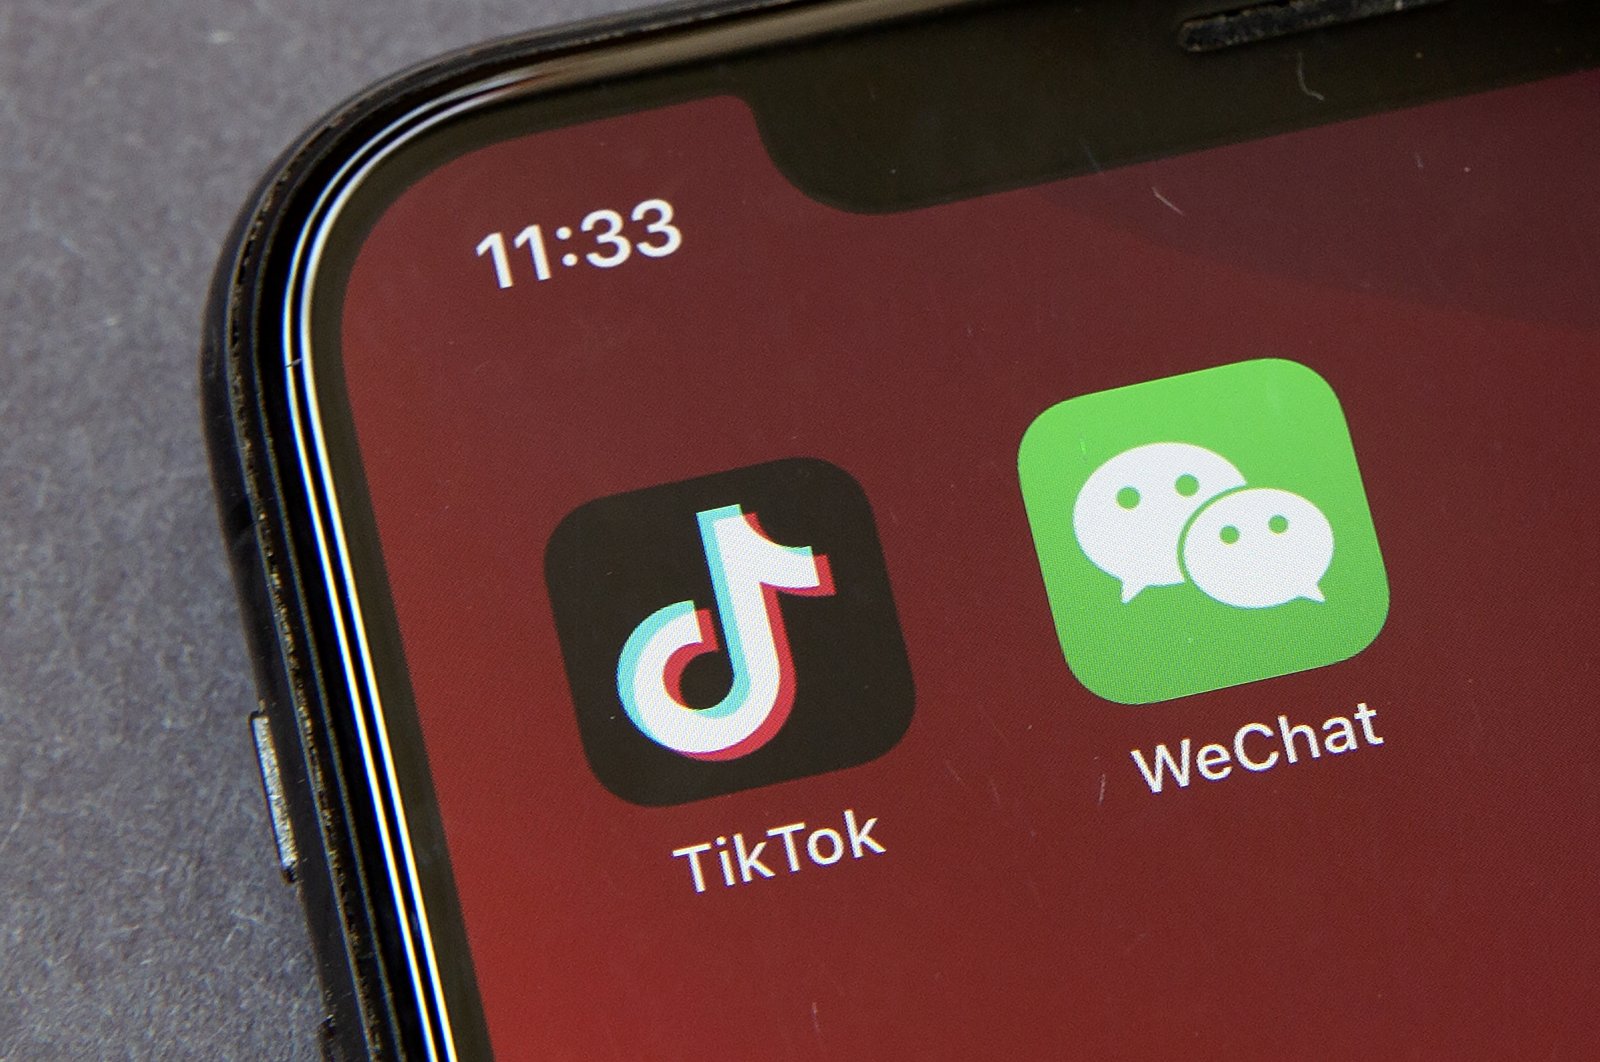 Icons for the smartphone apps TikTok and WeChat are seen on a smartphone screen in Beijing, in a Friday, Aug. 7, 2020 file photo. (AP Photo)